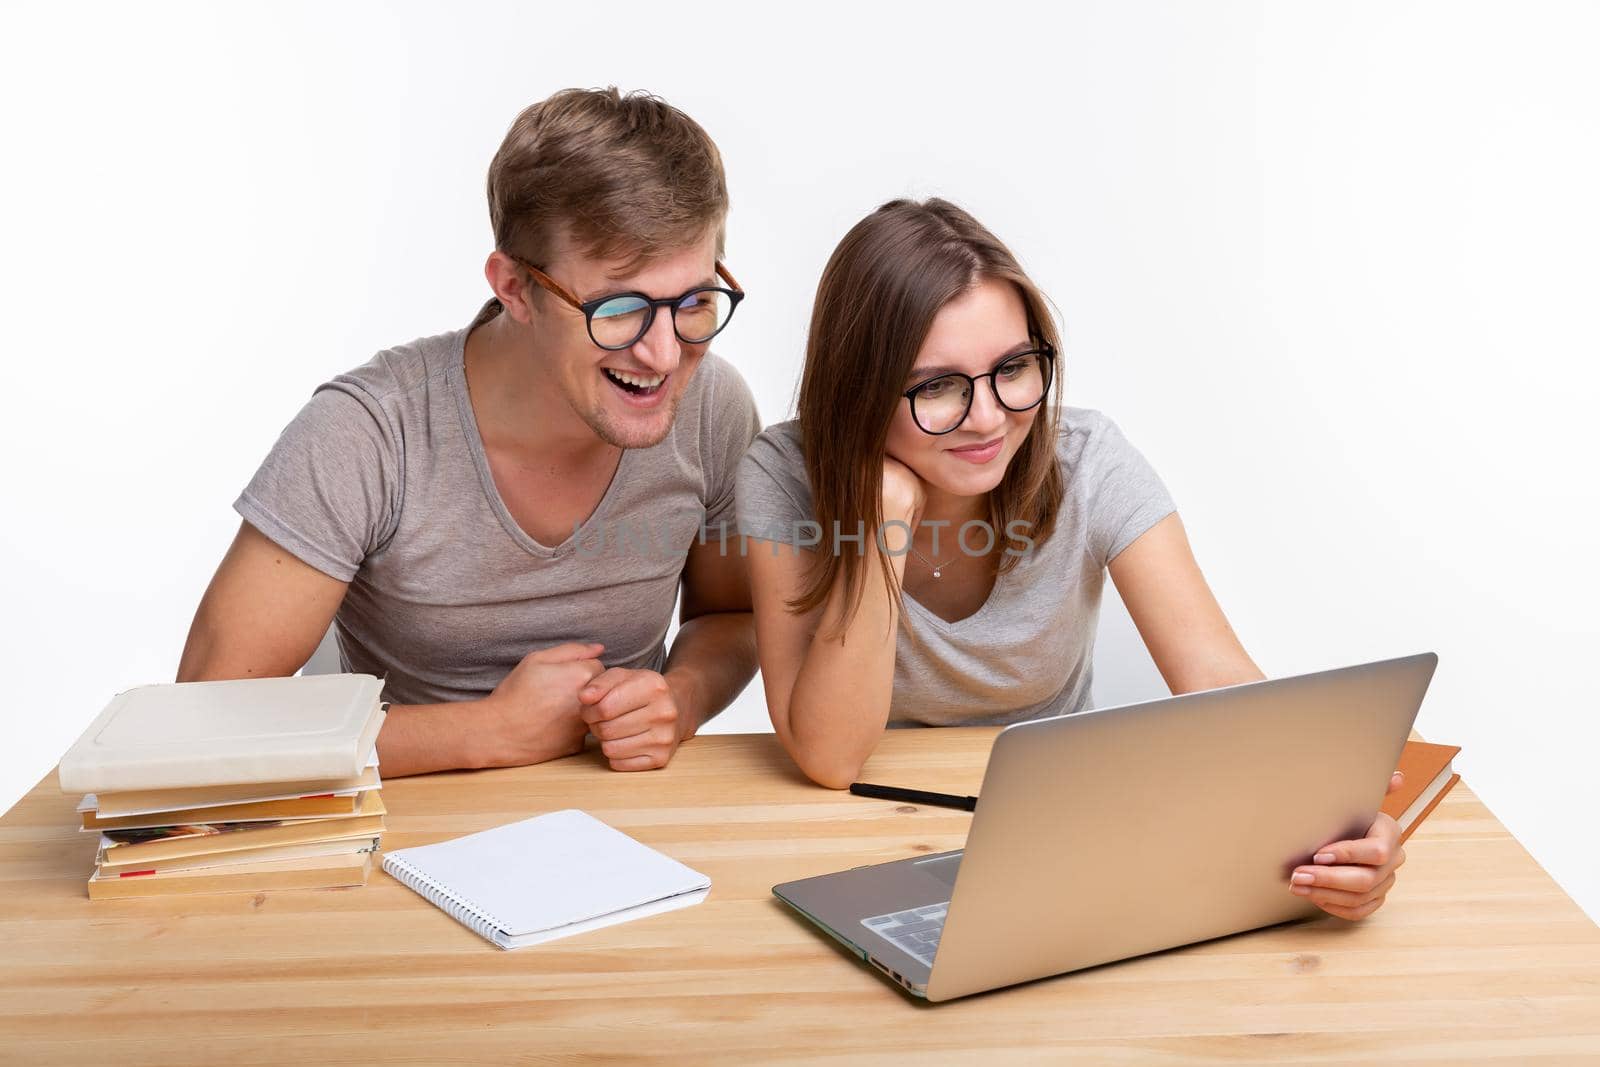 People and education concept - Two happy funny students sitting at the wooden table with laptop and books by Satura86